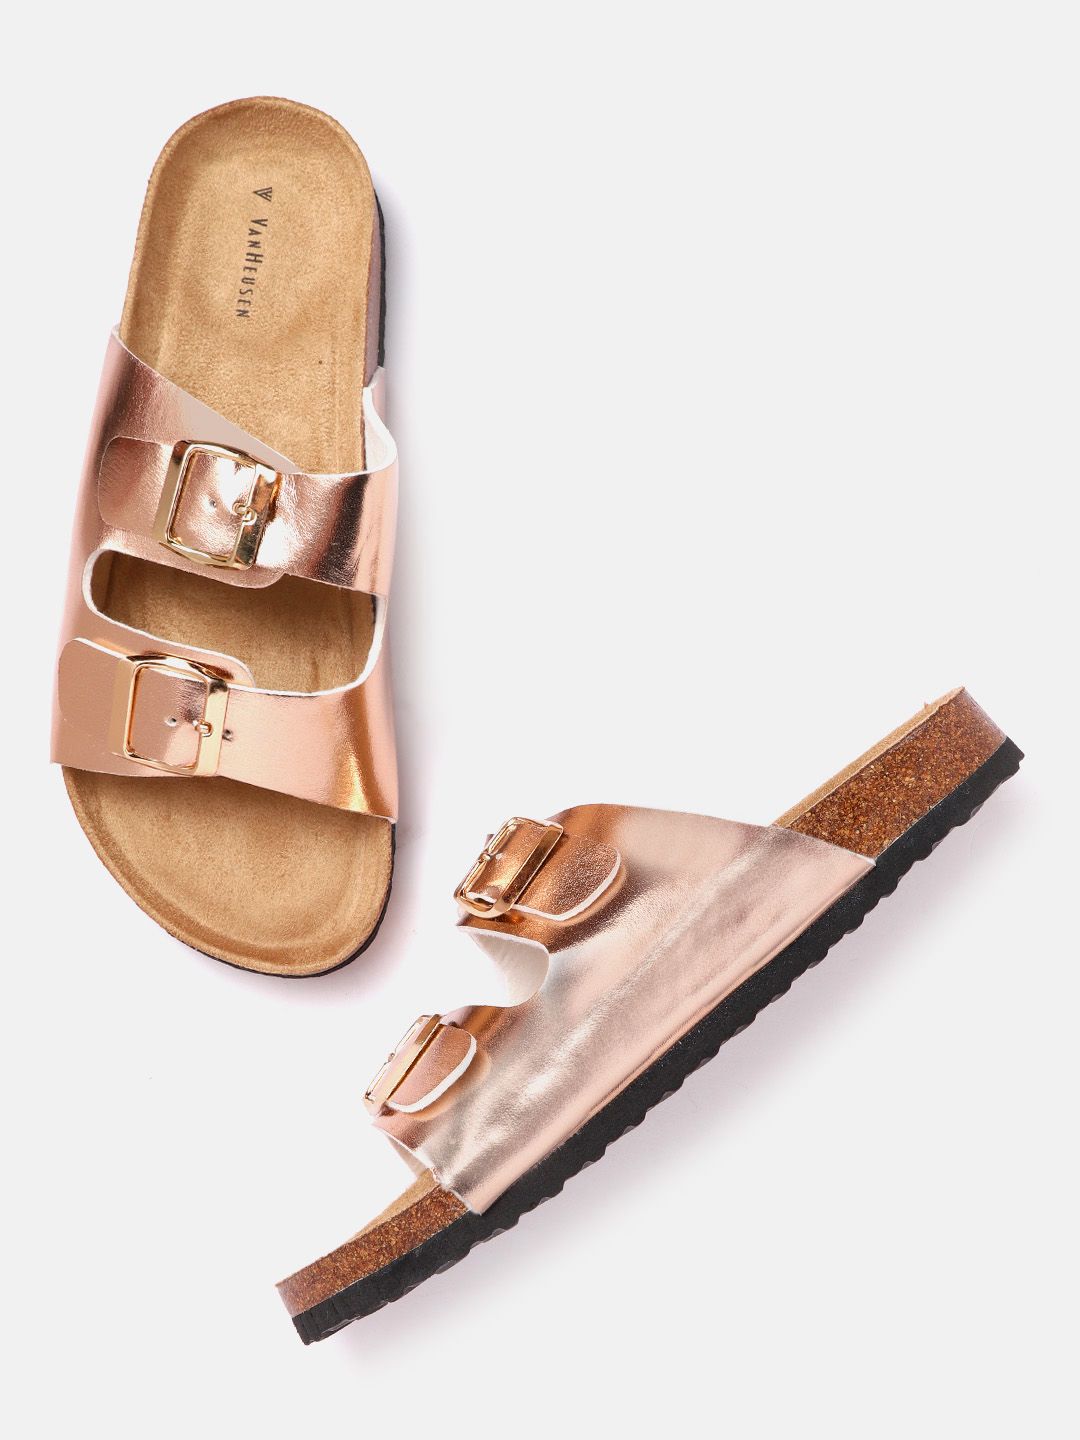 Van Heusen Woman Rose Gold-Toned Glossy Finish Open Toe Flats with Buckles Price in India